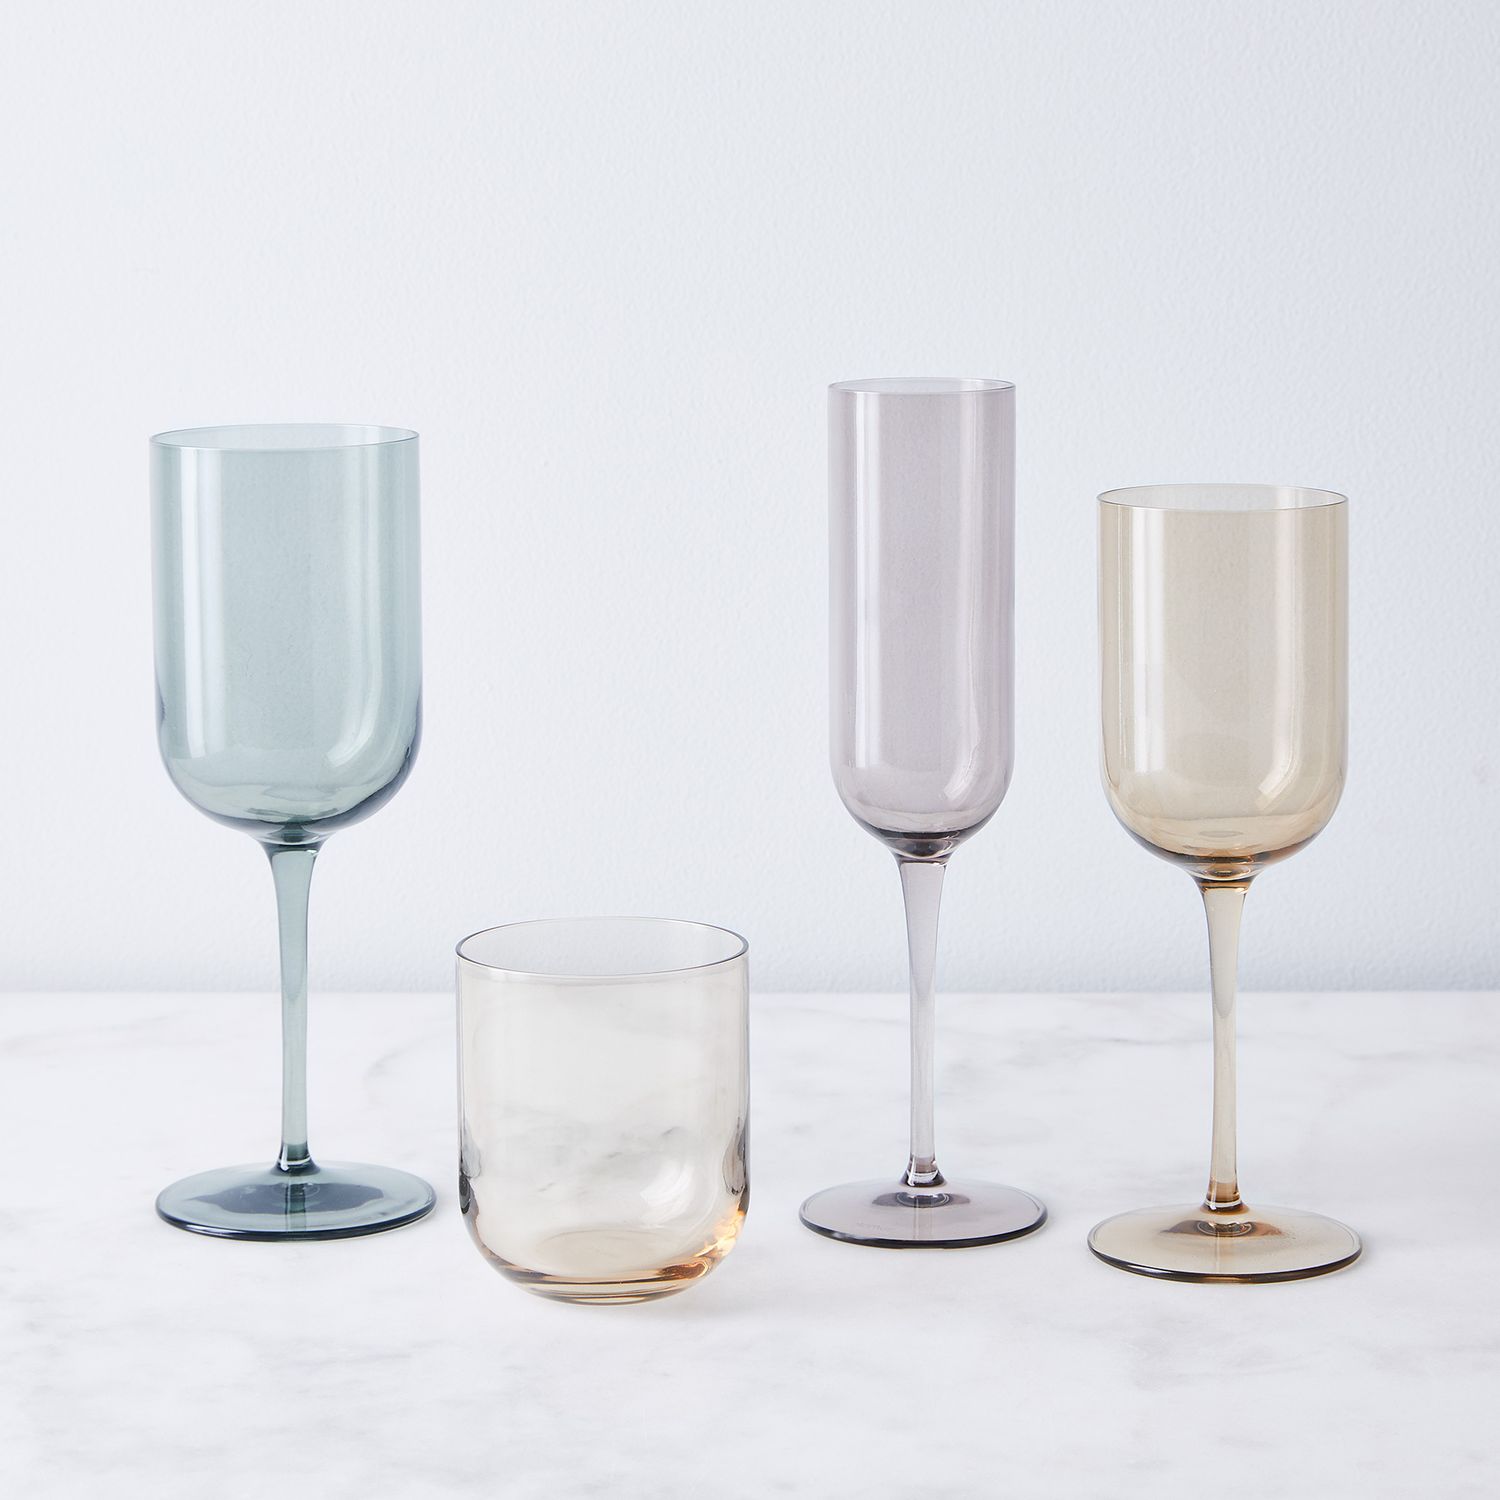 Lyngby Glas Valencia Wine Glasses, 3 Colors, Set of 6 on Food52